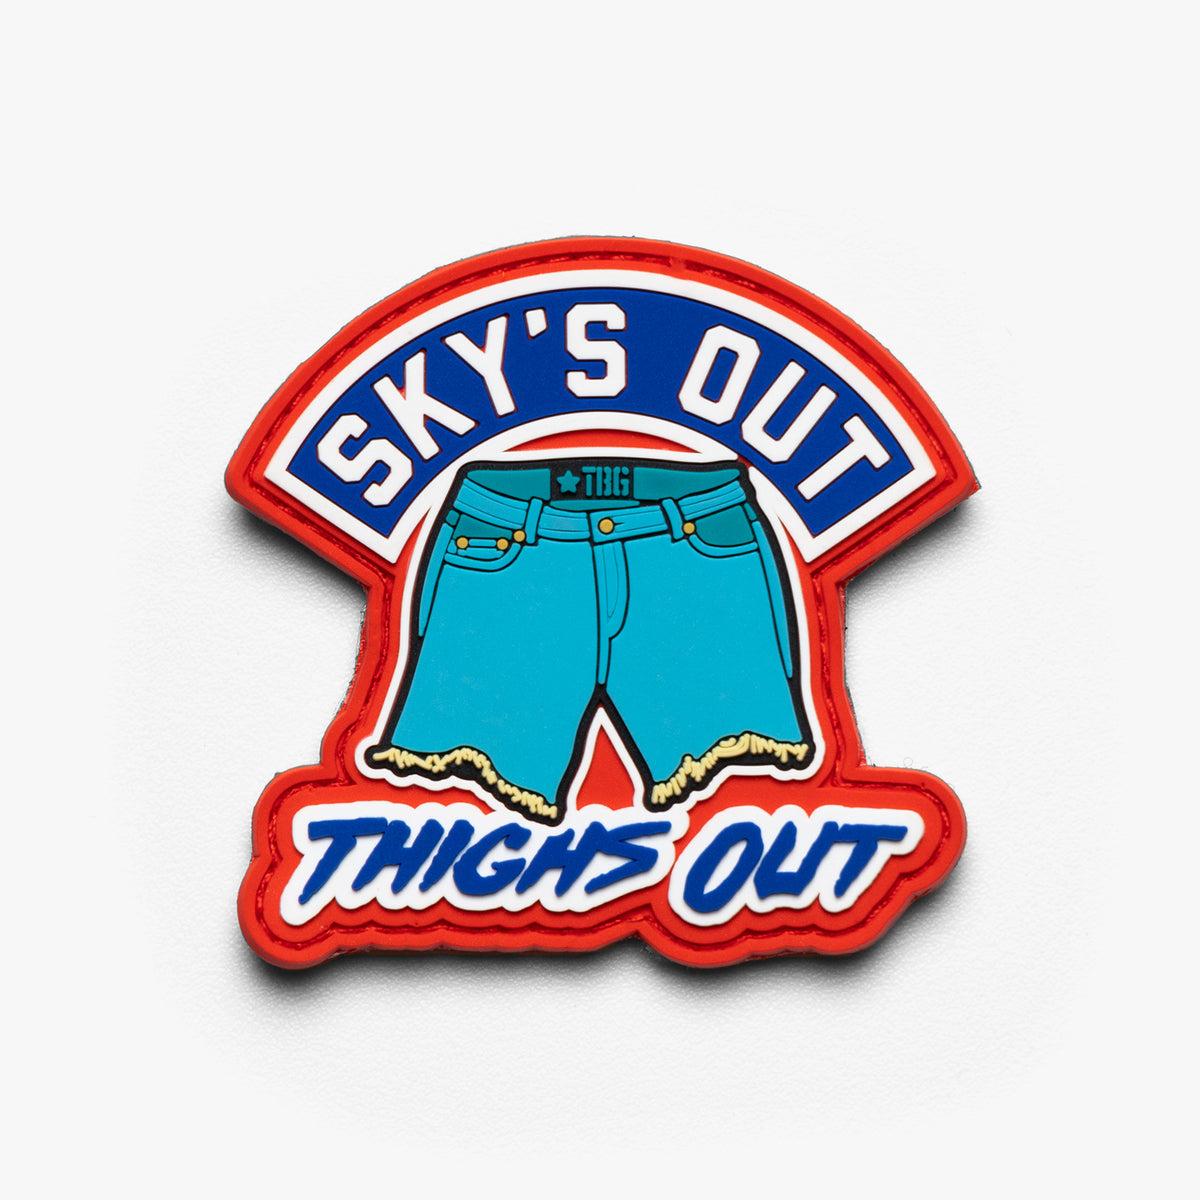 Sky&#39;s Out, Thighs Out Patch